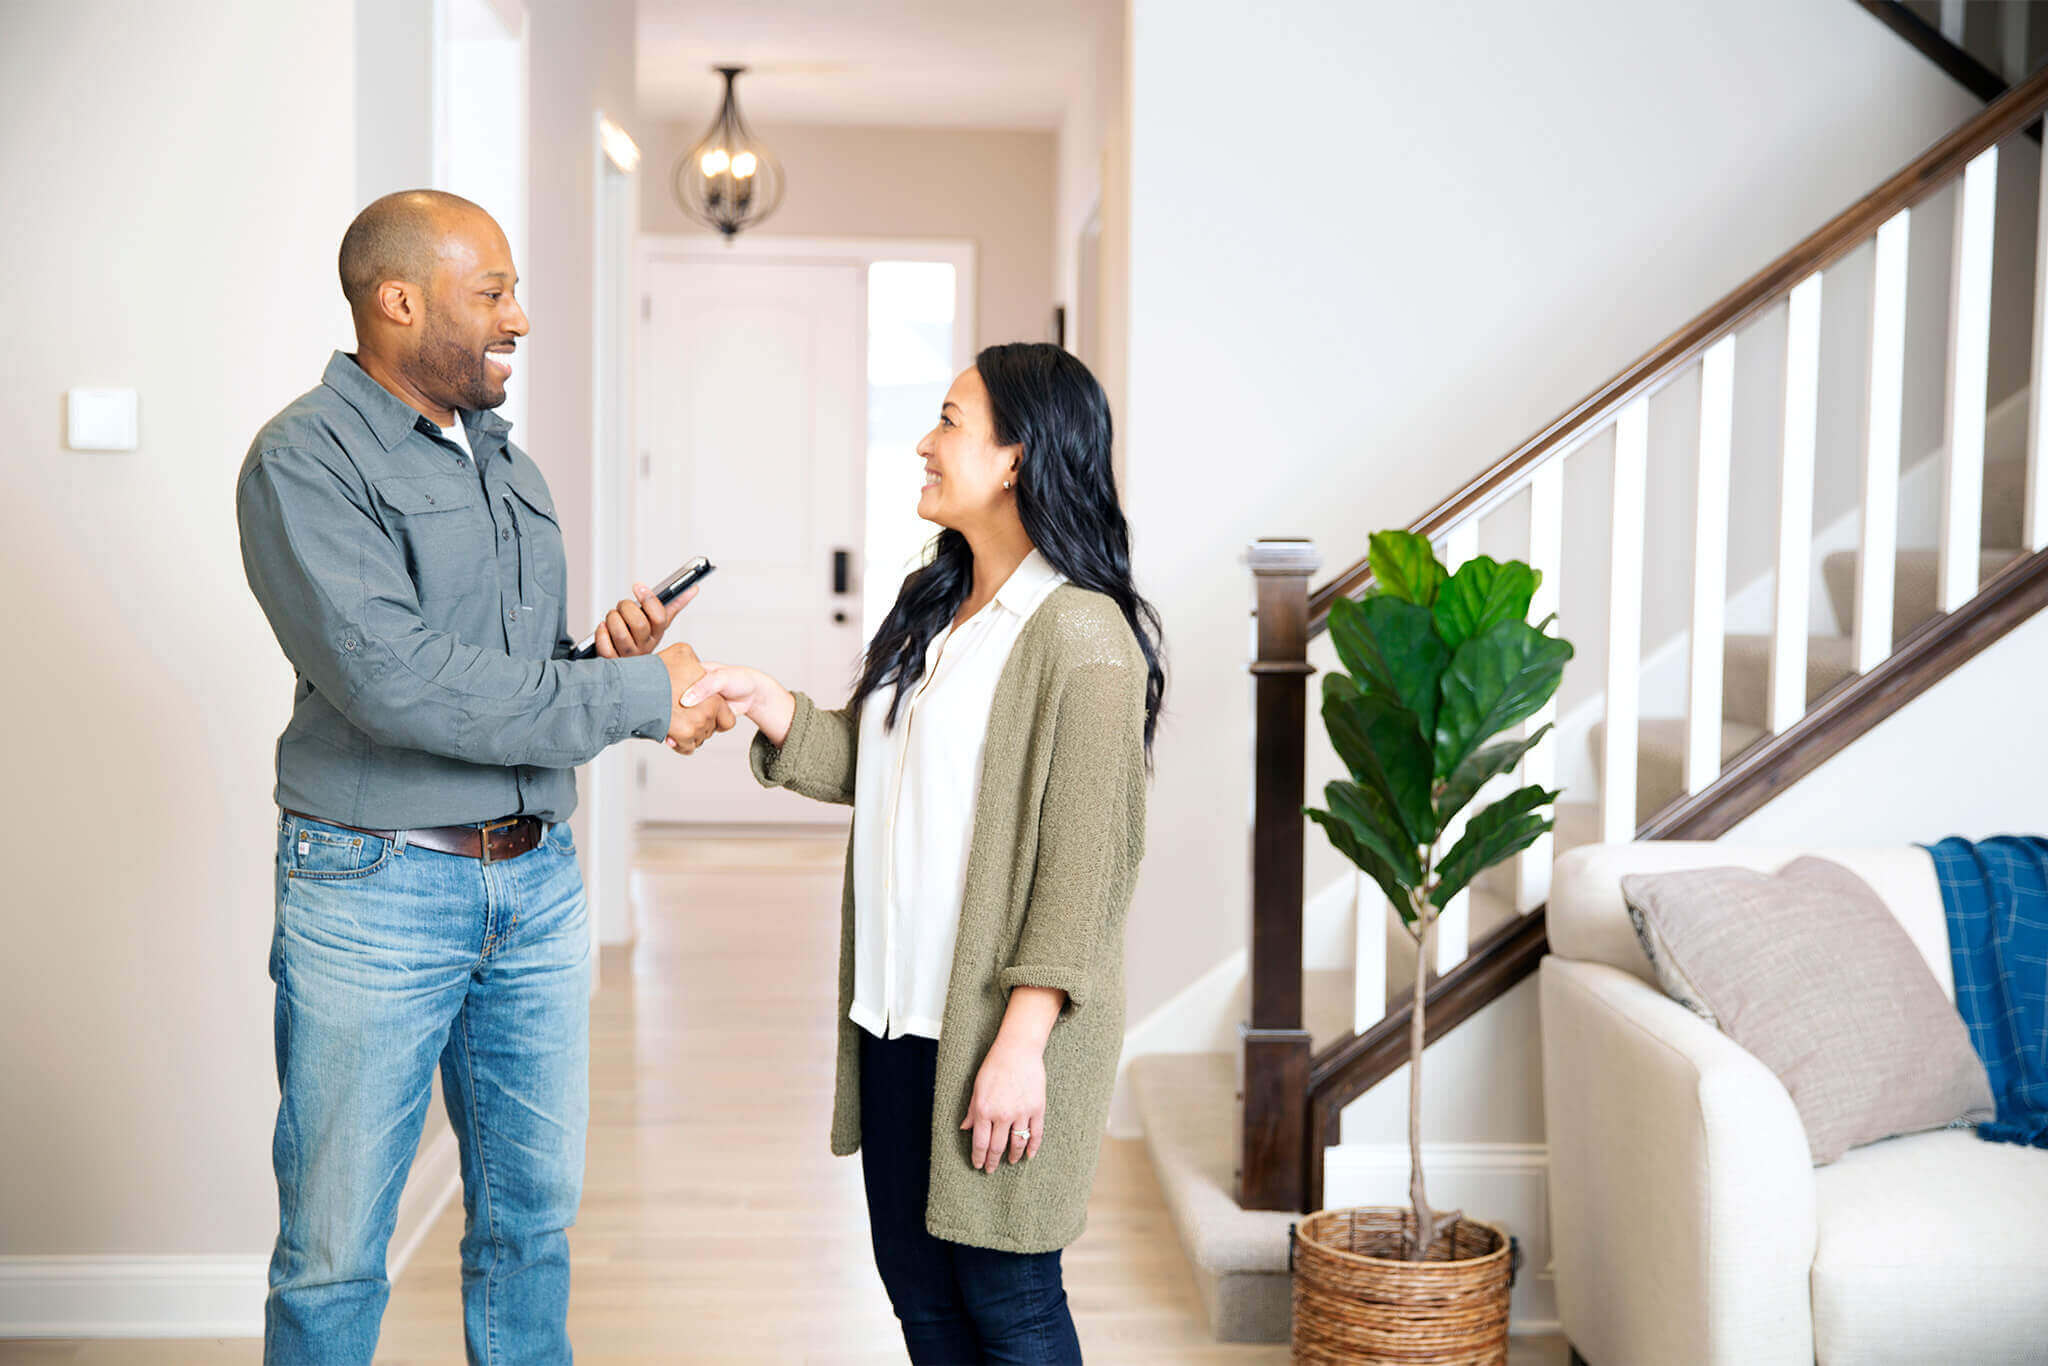 A Resideo pro greets a customer in her home.